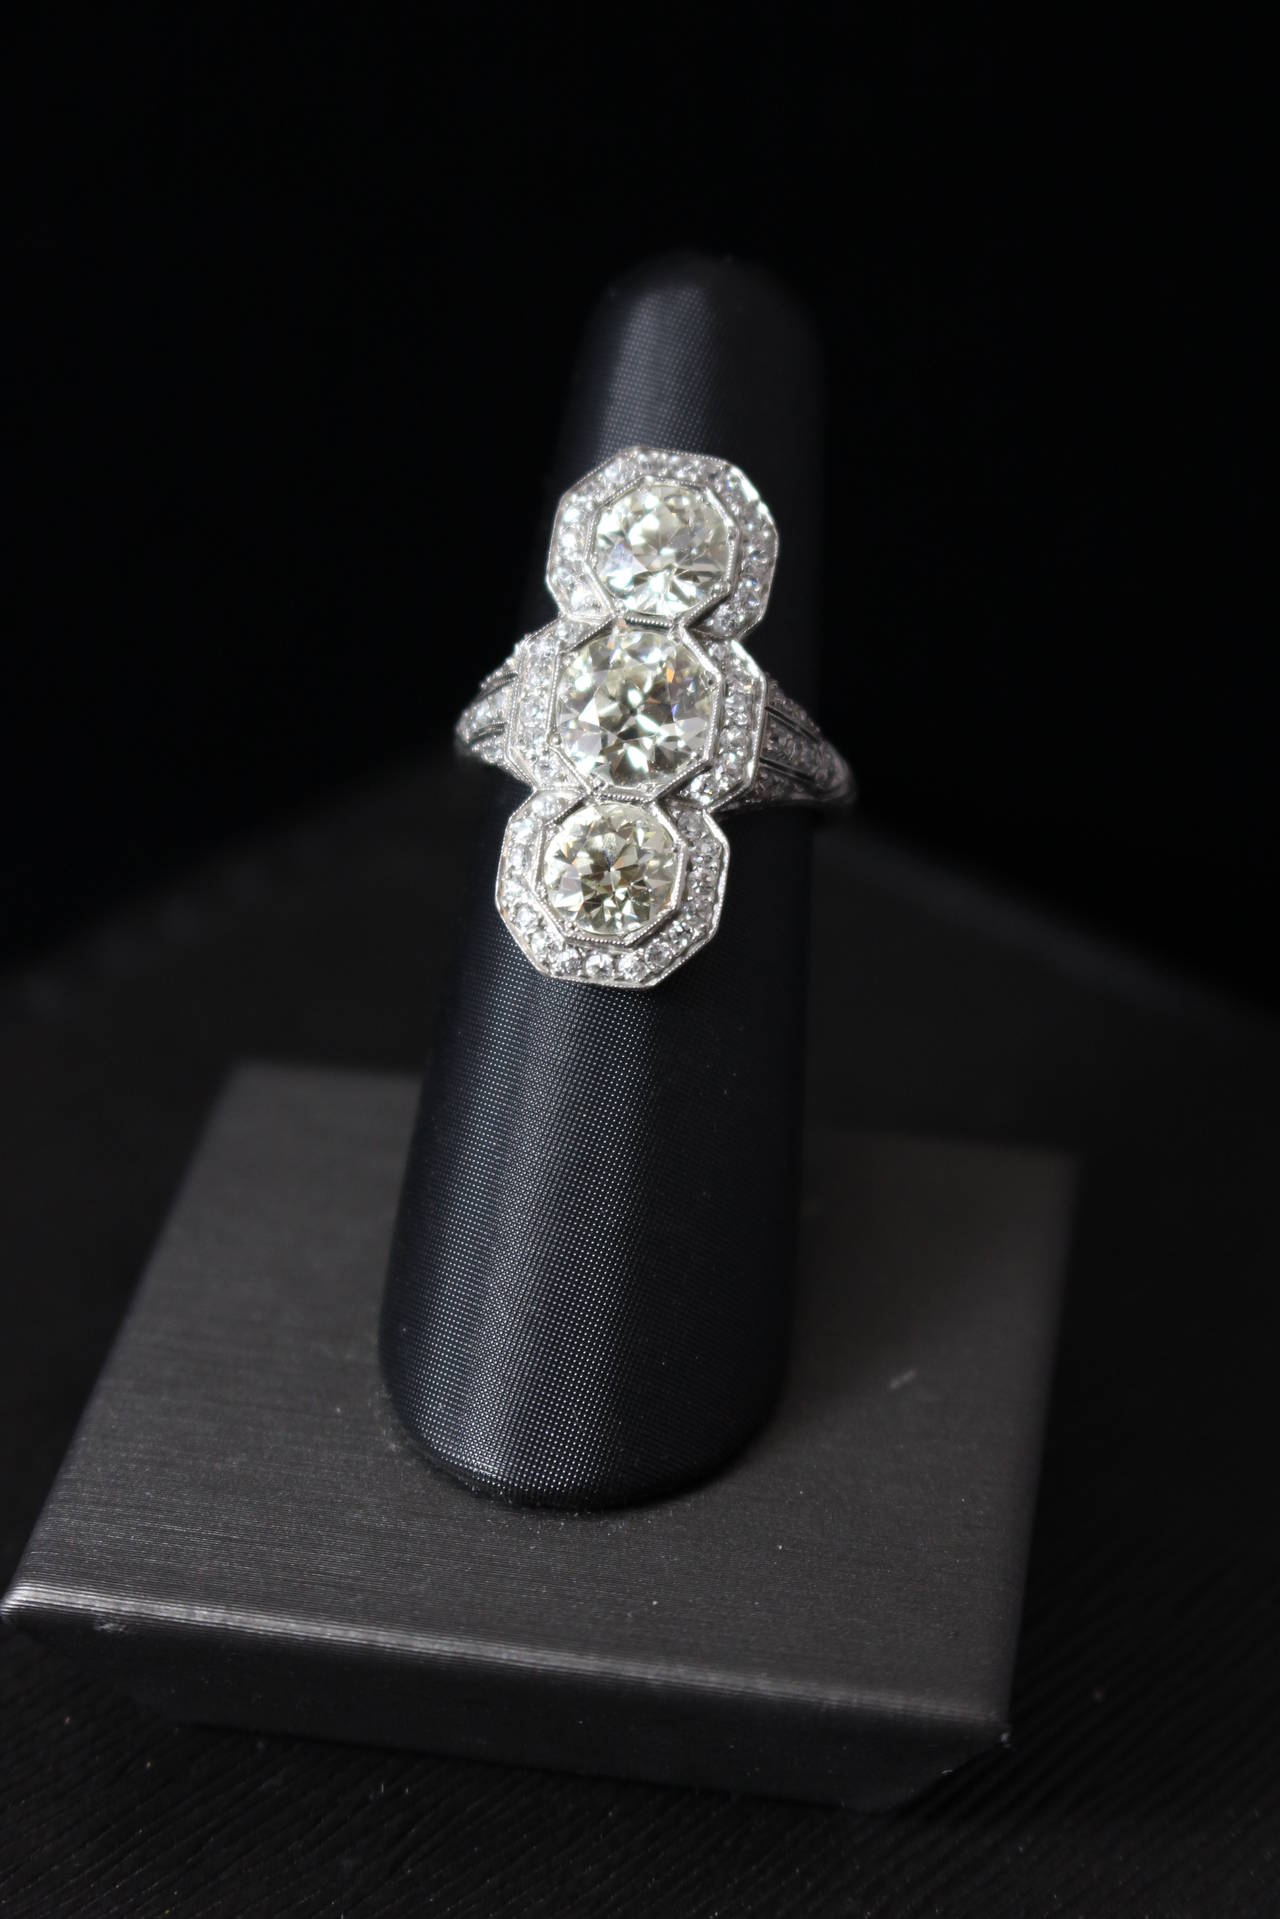 This is a lovely Edwardian diamond cocktail ring. The ring features three KVS European cut diamonds with a center stone weighting approximately 2.10 carats and the two additional diamonds weighting approximately 1.20 carats each. Size 6.5 (easily